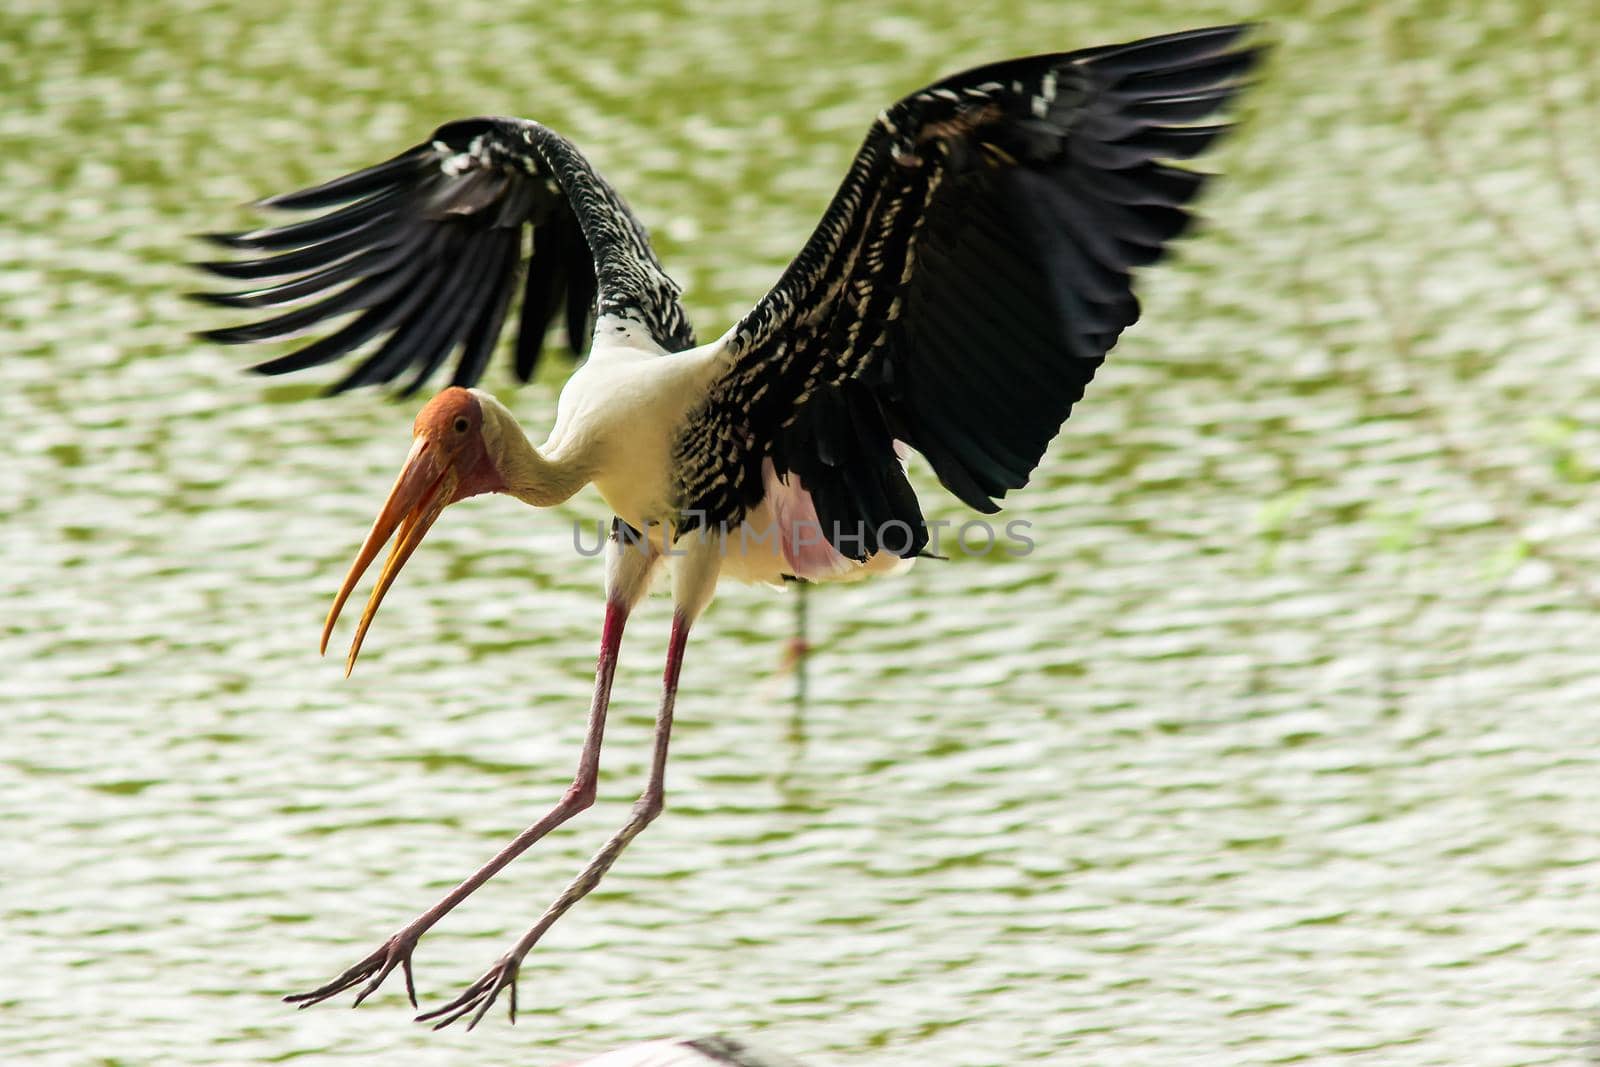 Painted Stork is flying over the pond. by Puripatt